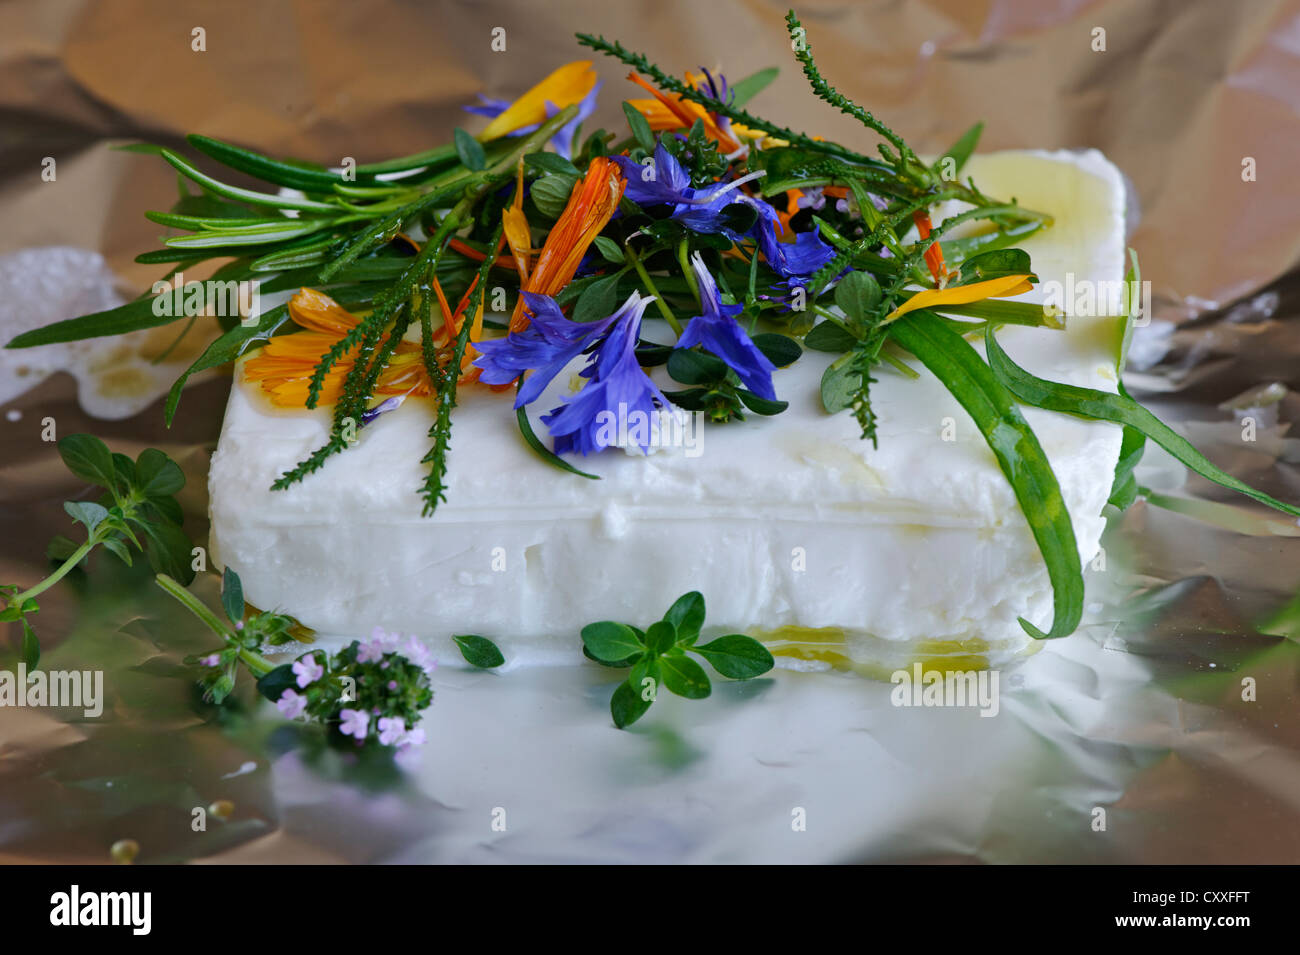 Goat's cheese for grilling, grill cheese, meatless grilling, cooking herbs, topped with marigold flowers, cornflowers, tarragon Stock Photo